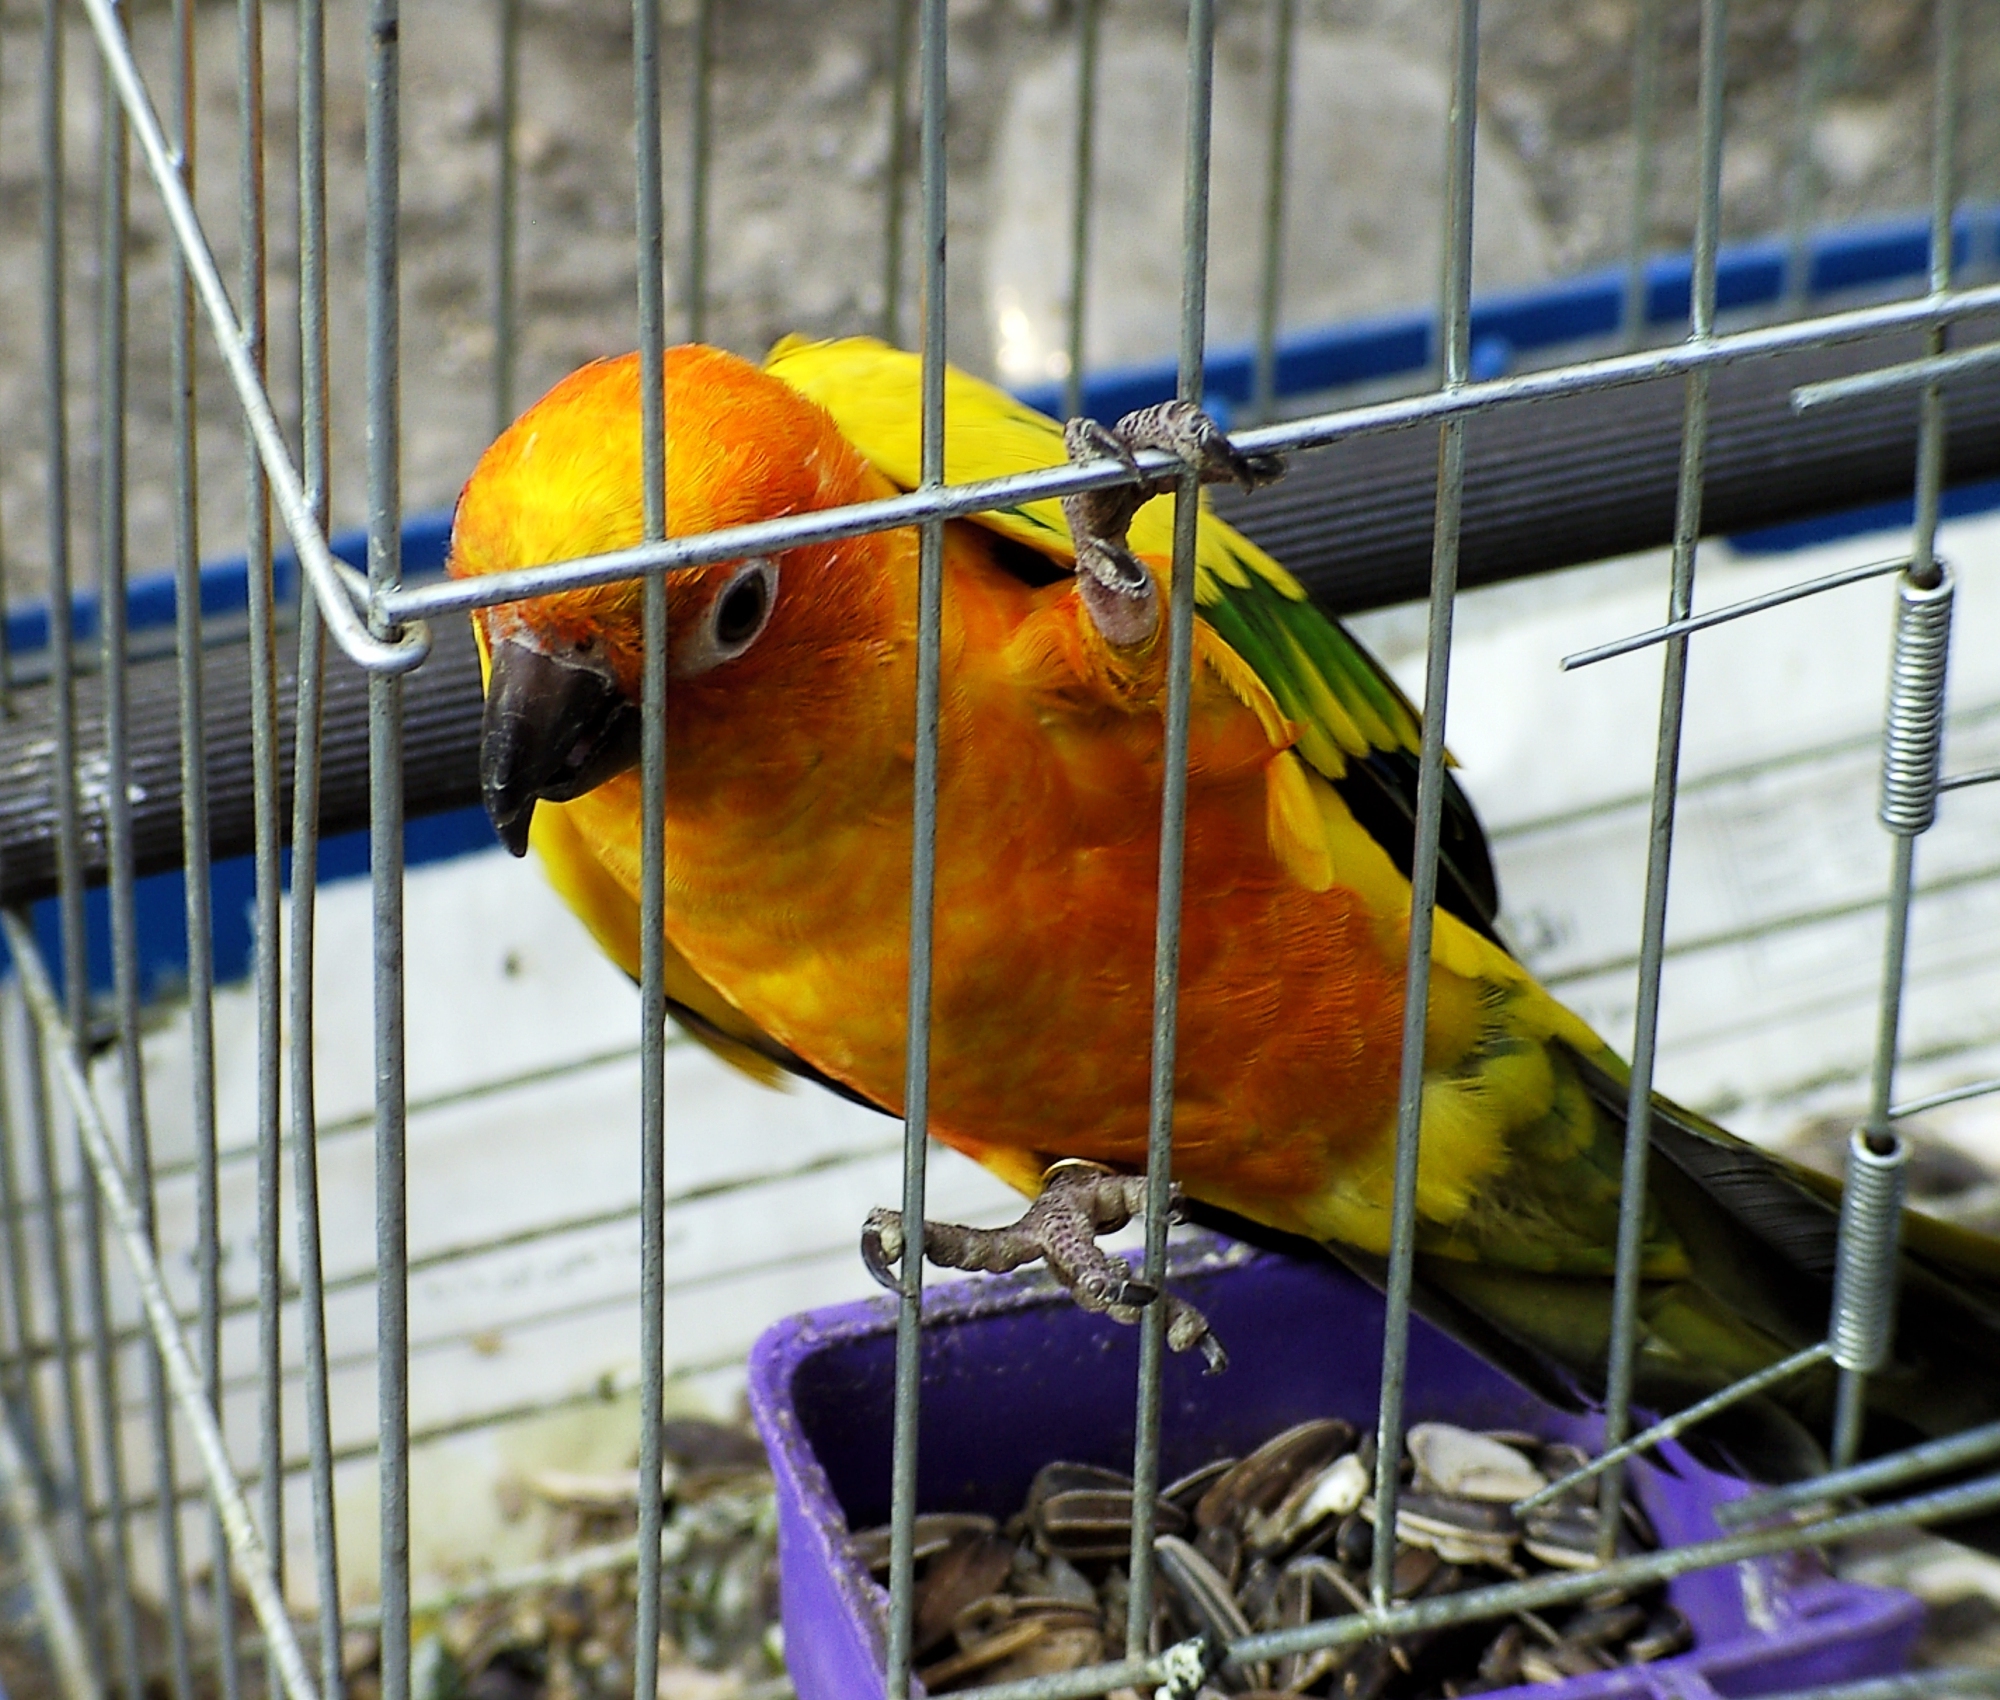 File:Bird in cage.jpg - Wikimedia Commons